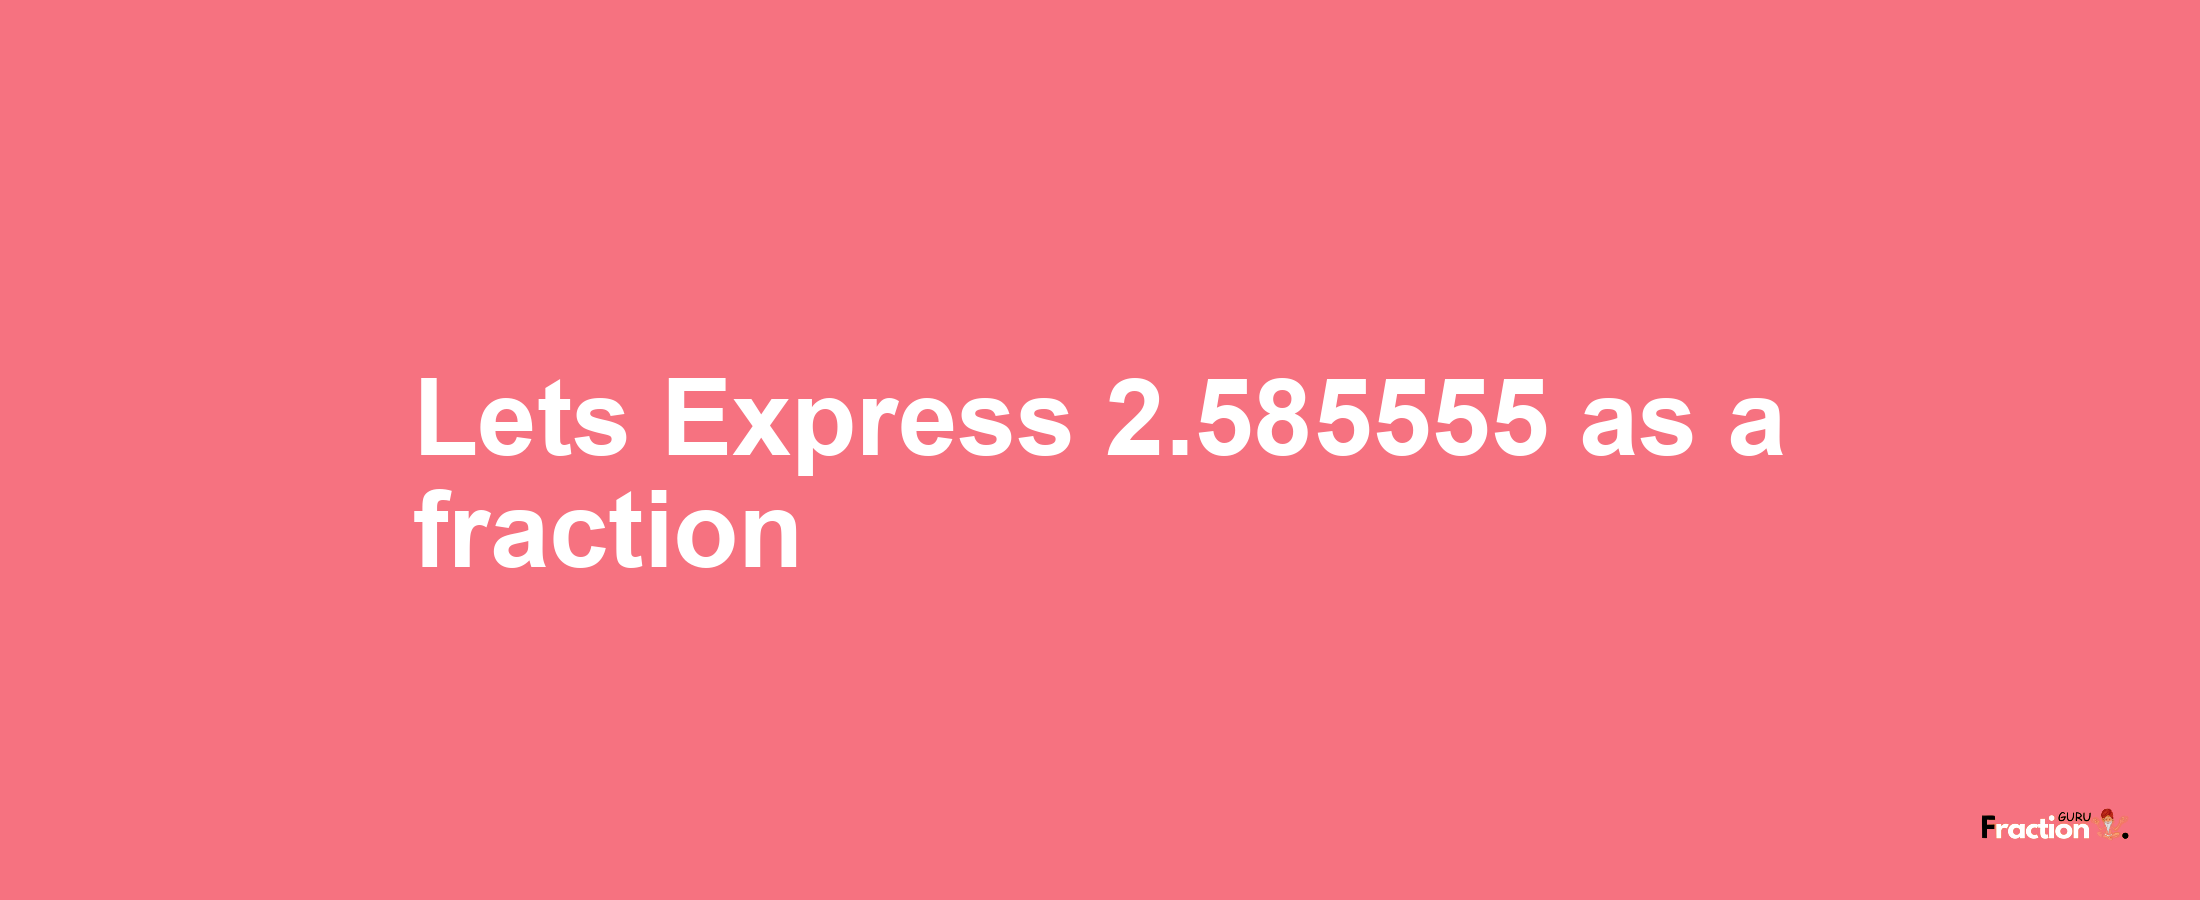 Lets Express 2.585555 as afraction